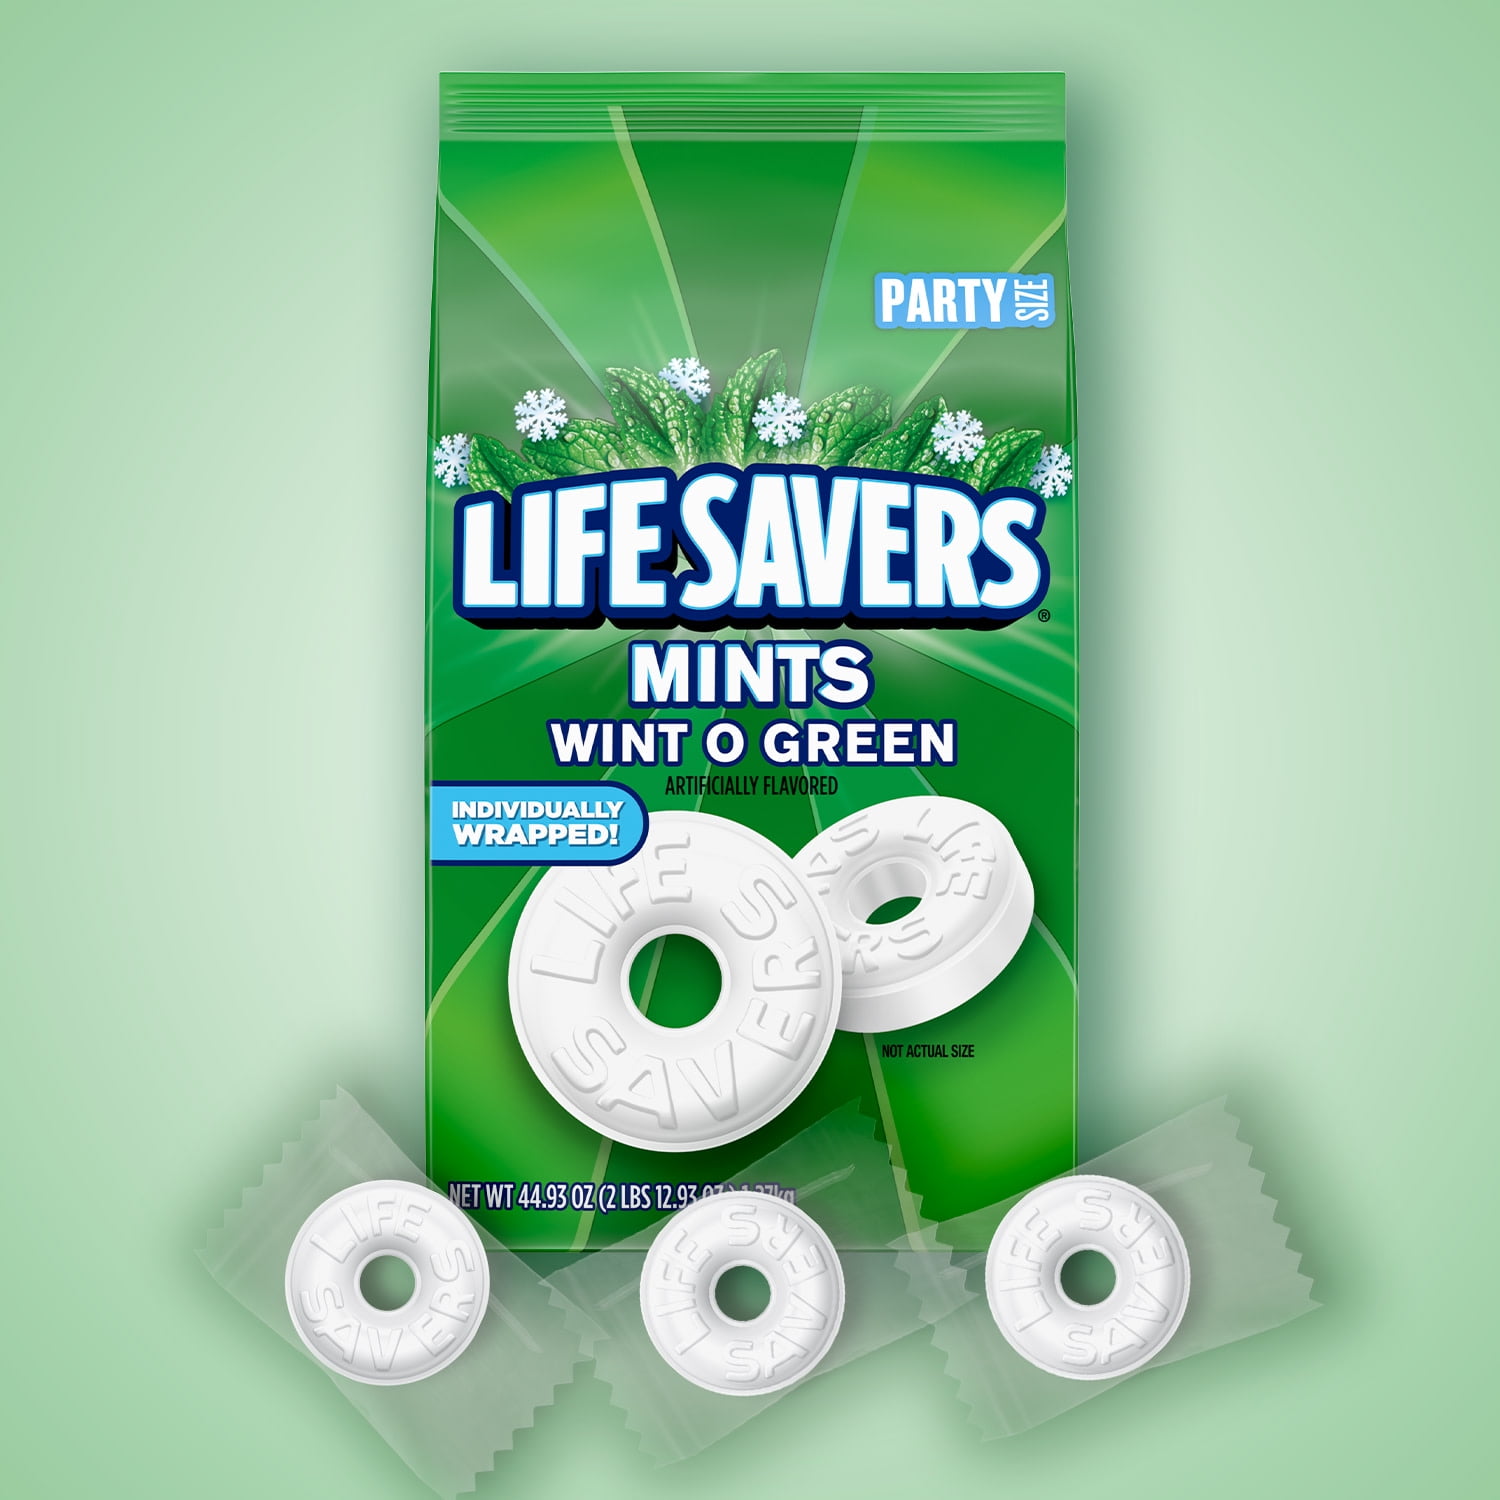 Life Savers Wint-O-Green Breath Mint Hard Candy, Party Size 